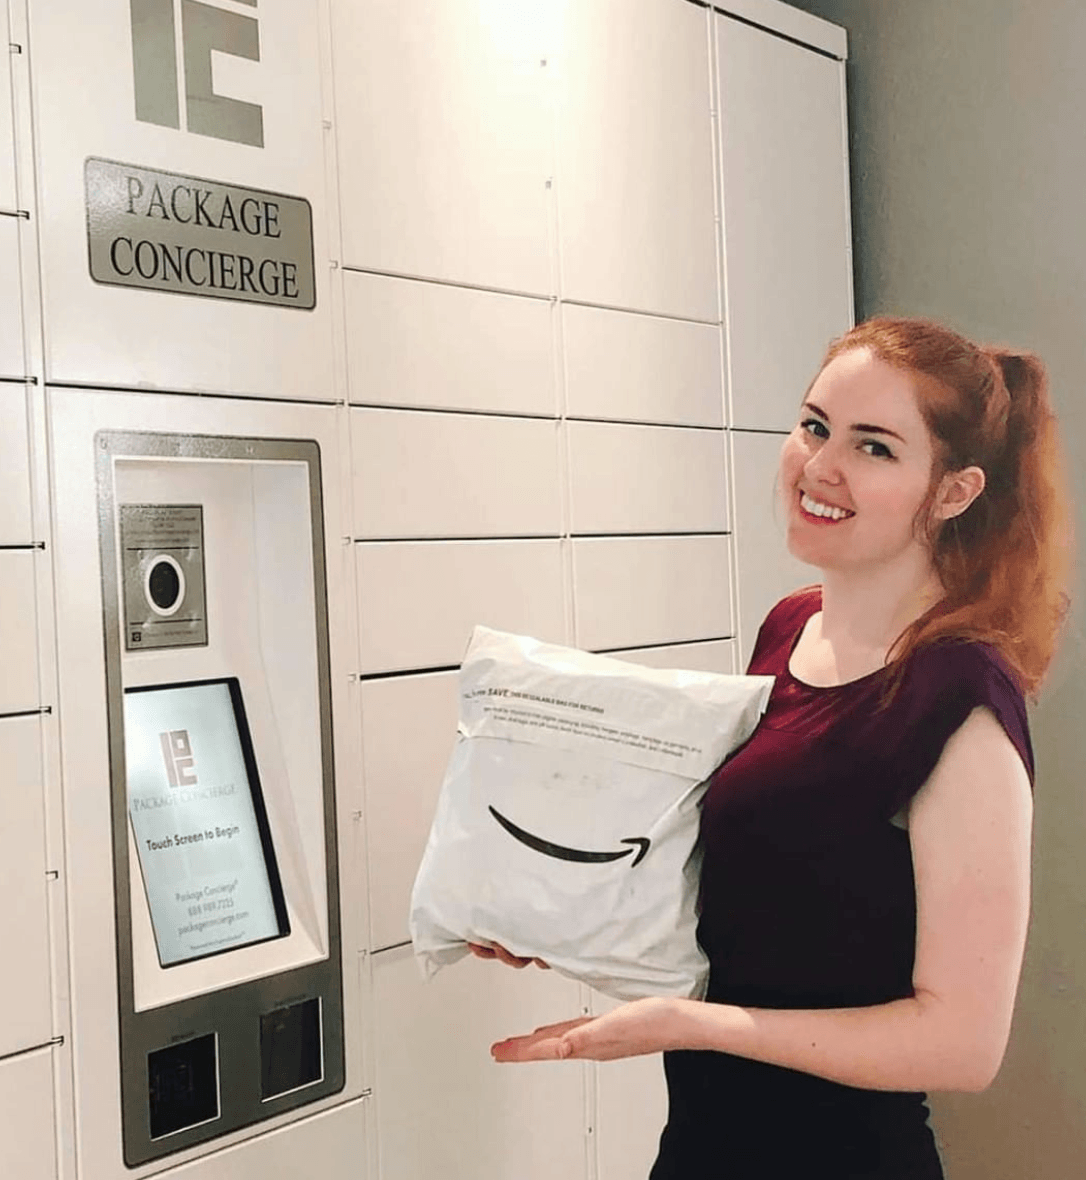 A woman in a maroon shirt is holding an Amazon package in front of a Package Concierge® smart electronic parcel locker